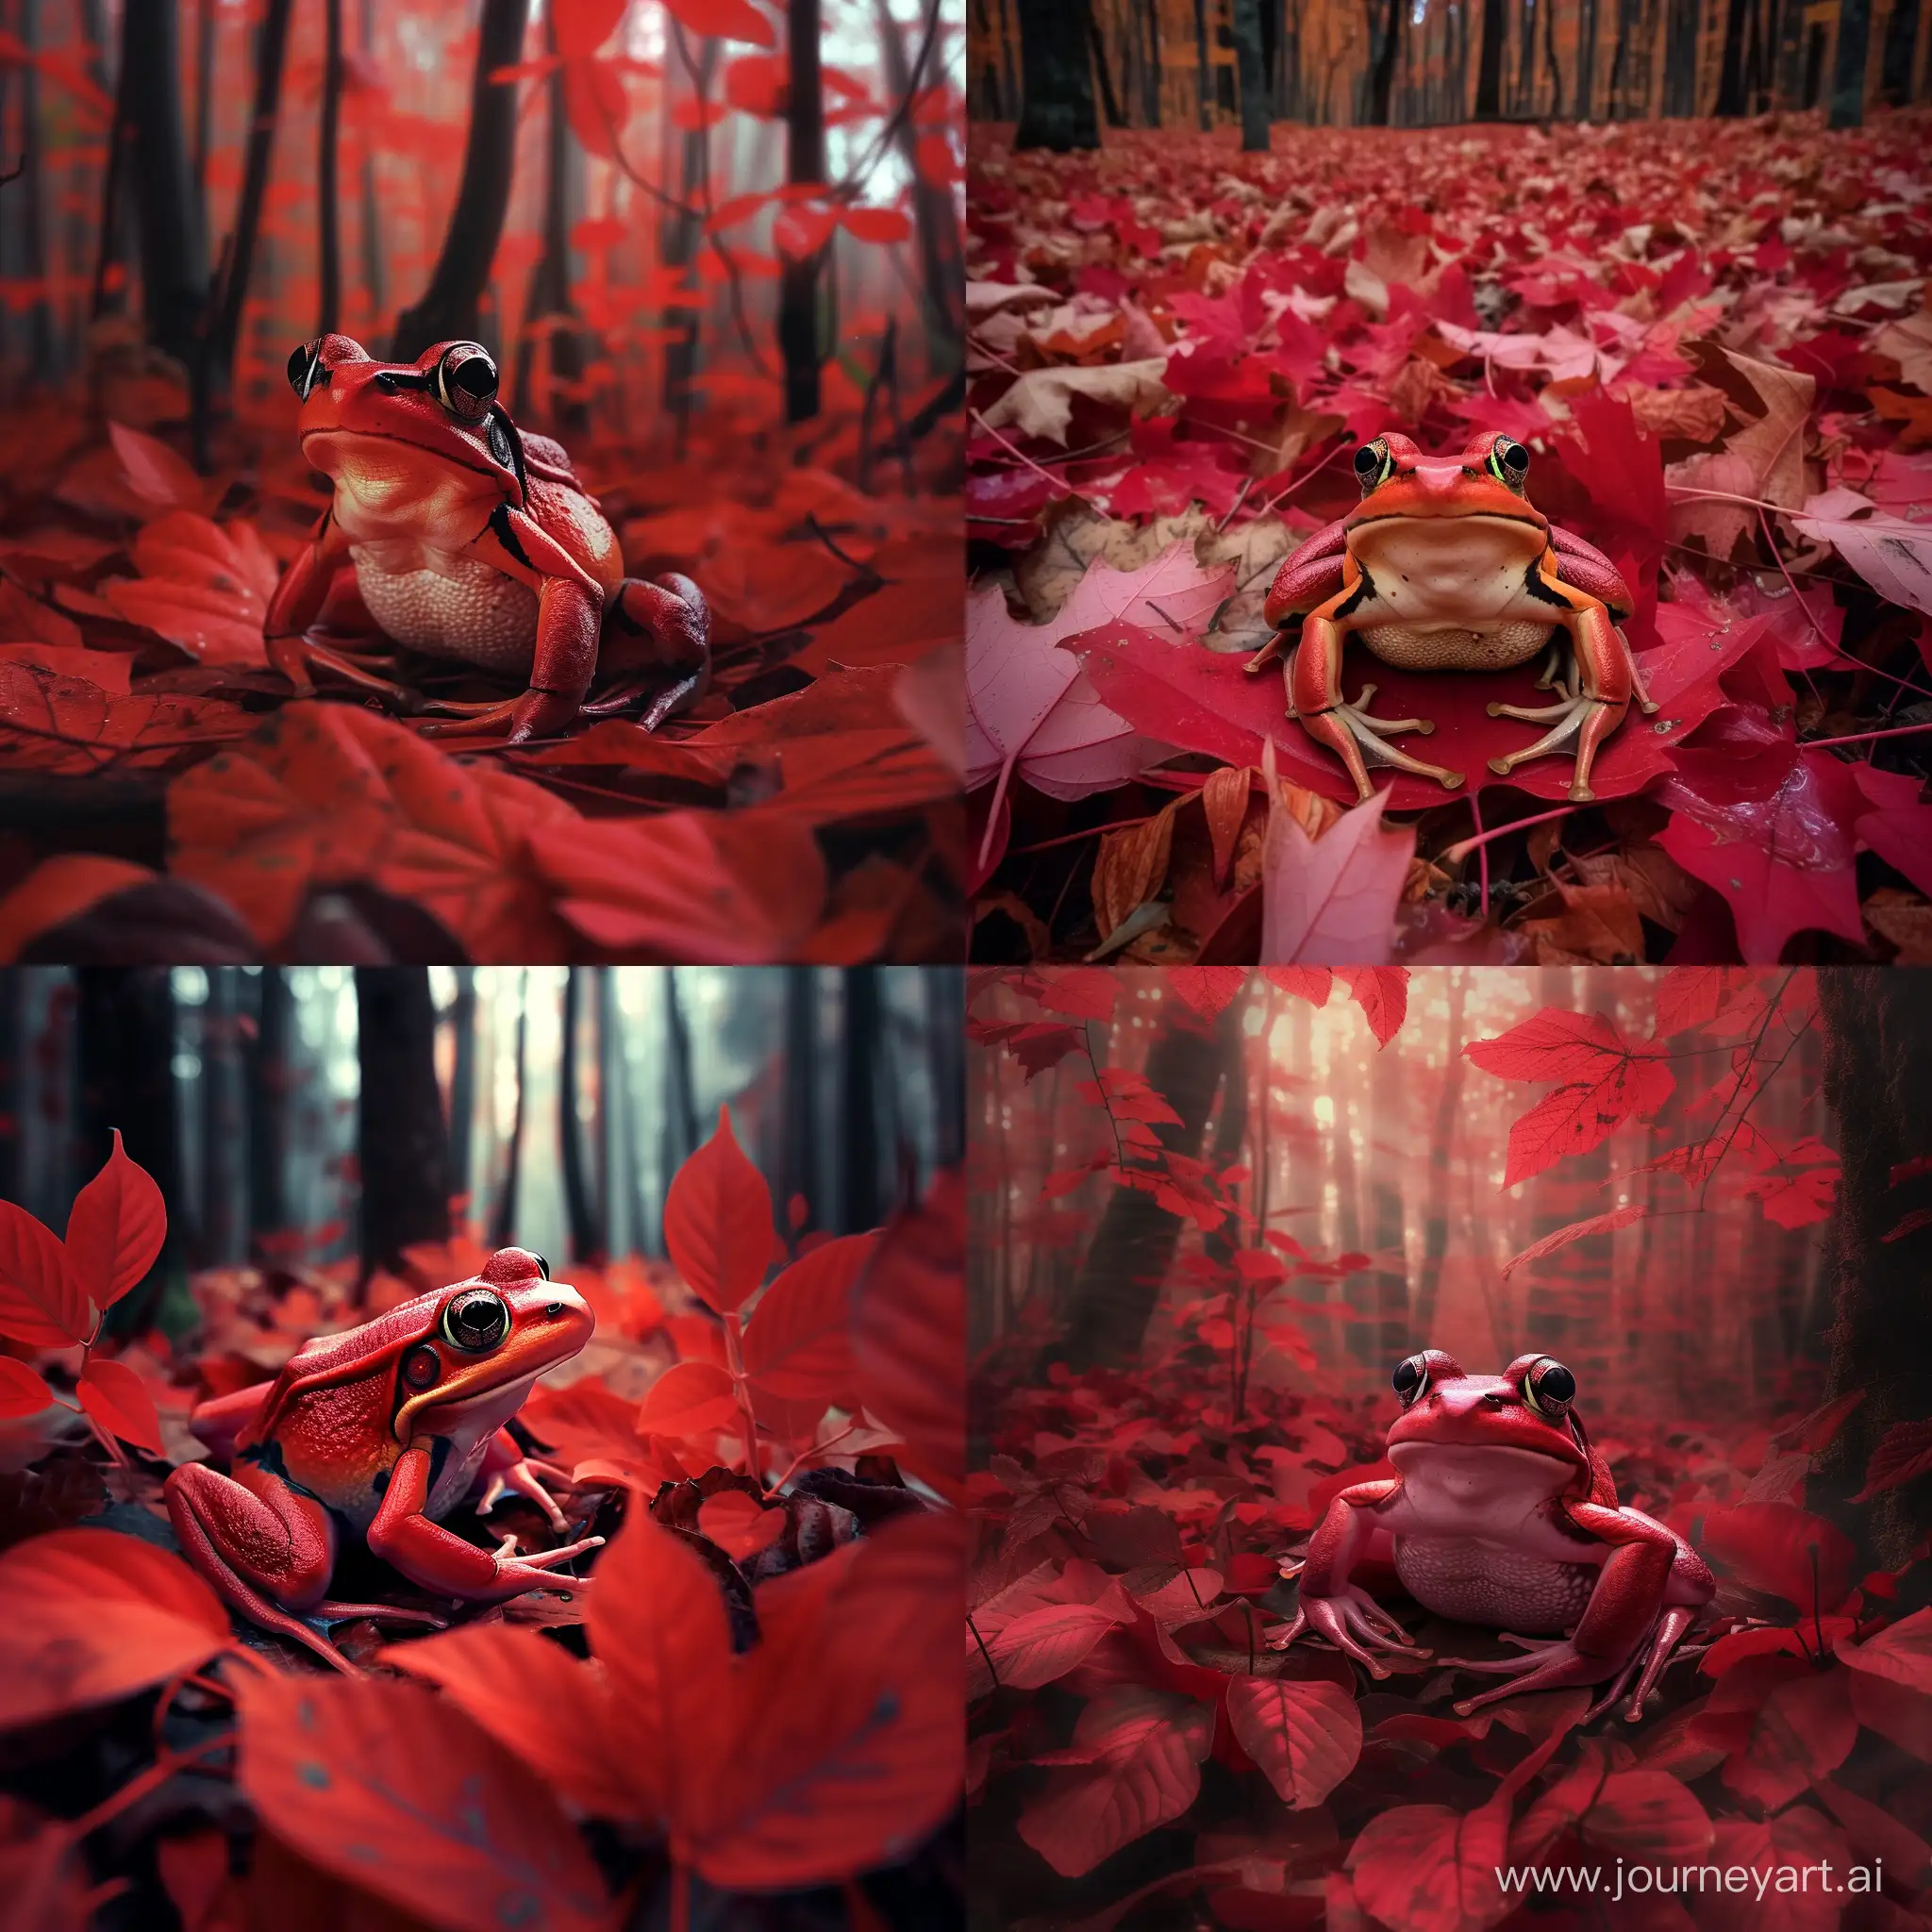 A red frog in a forest full of red leaves